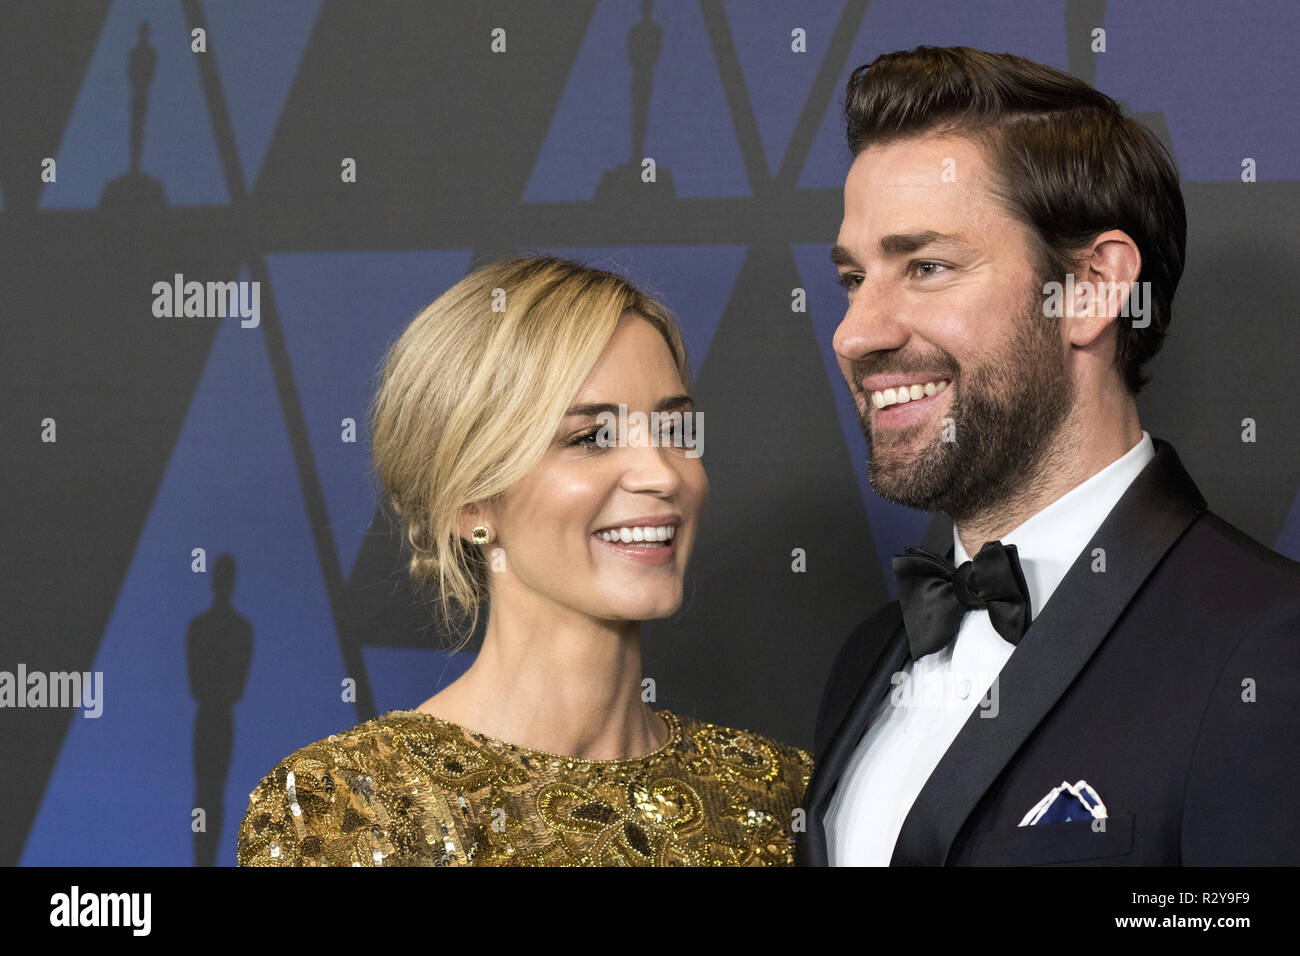 Emily Blunt and John Krrasinski attend the Academy’s 2018 Annual Governors Awards in The Ray Dolby Ballroom at Hollywood & Highland Center in Hollywood, CA, on Sunday, November 18, 2018. Stock Photo